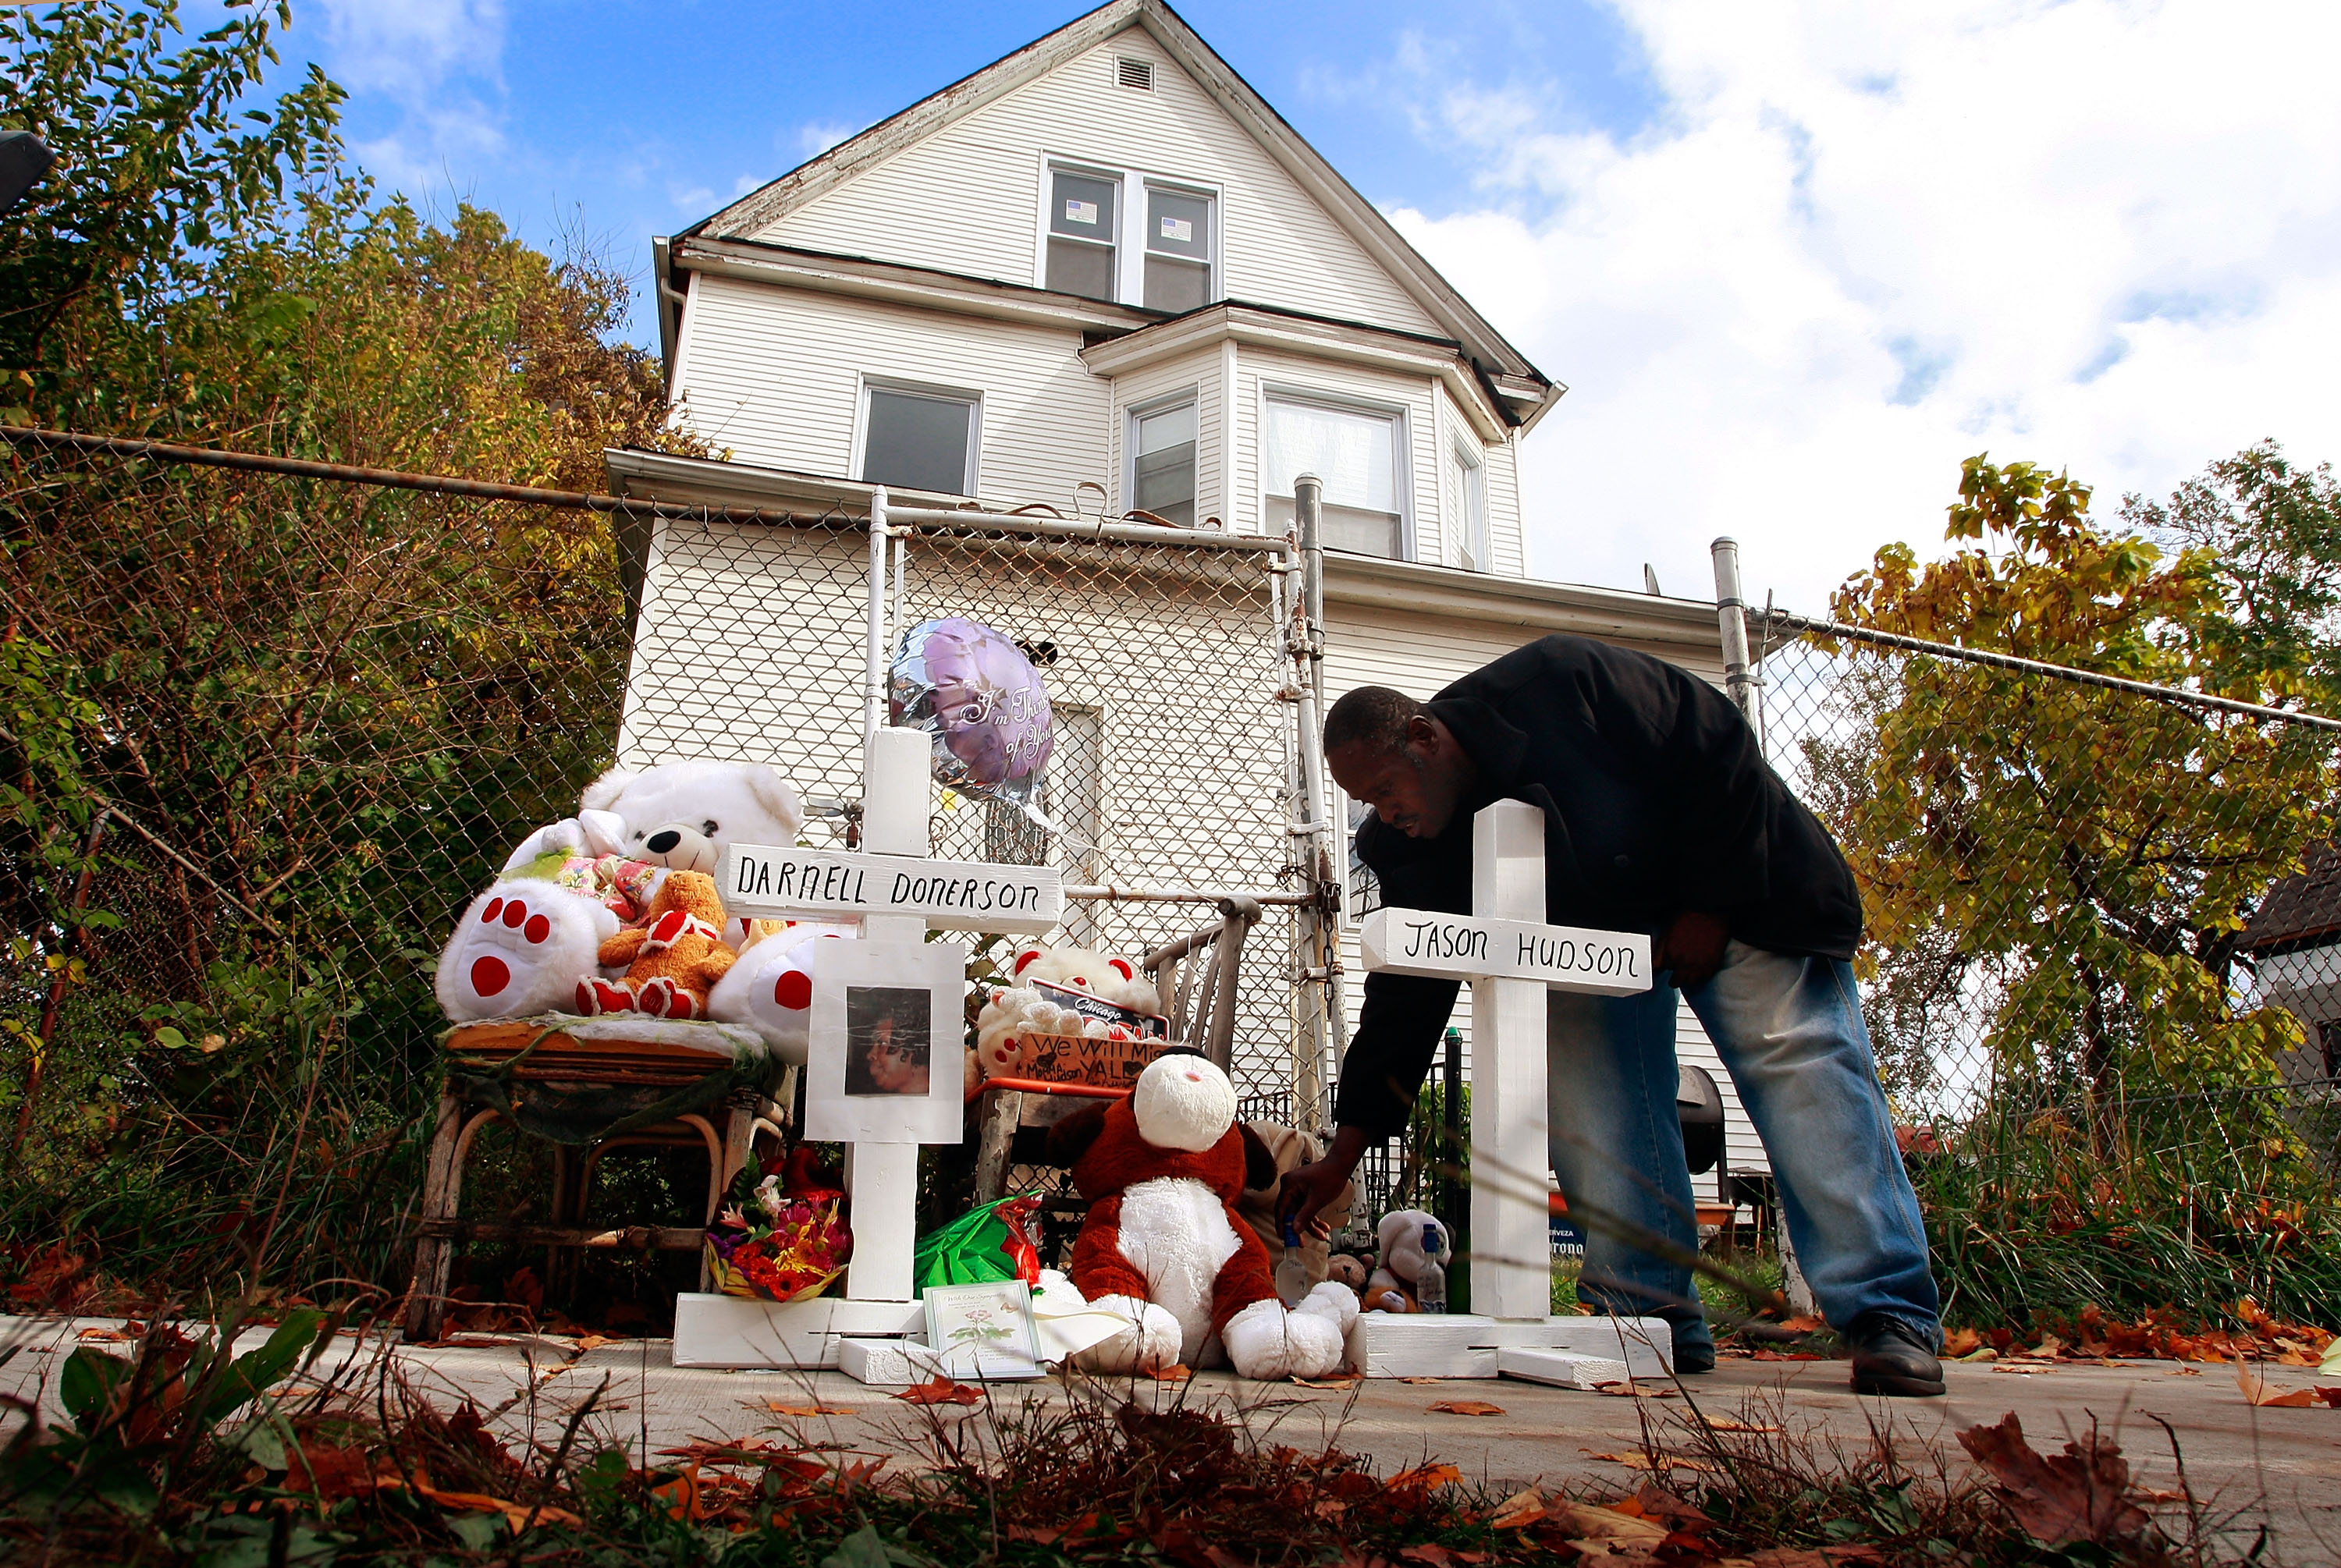 A memorial outside the home of Darnell Hudson Donerson, October 25, 2008 in Chicago, Illinois. | Source: Getty Images